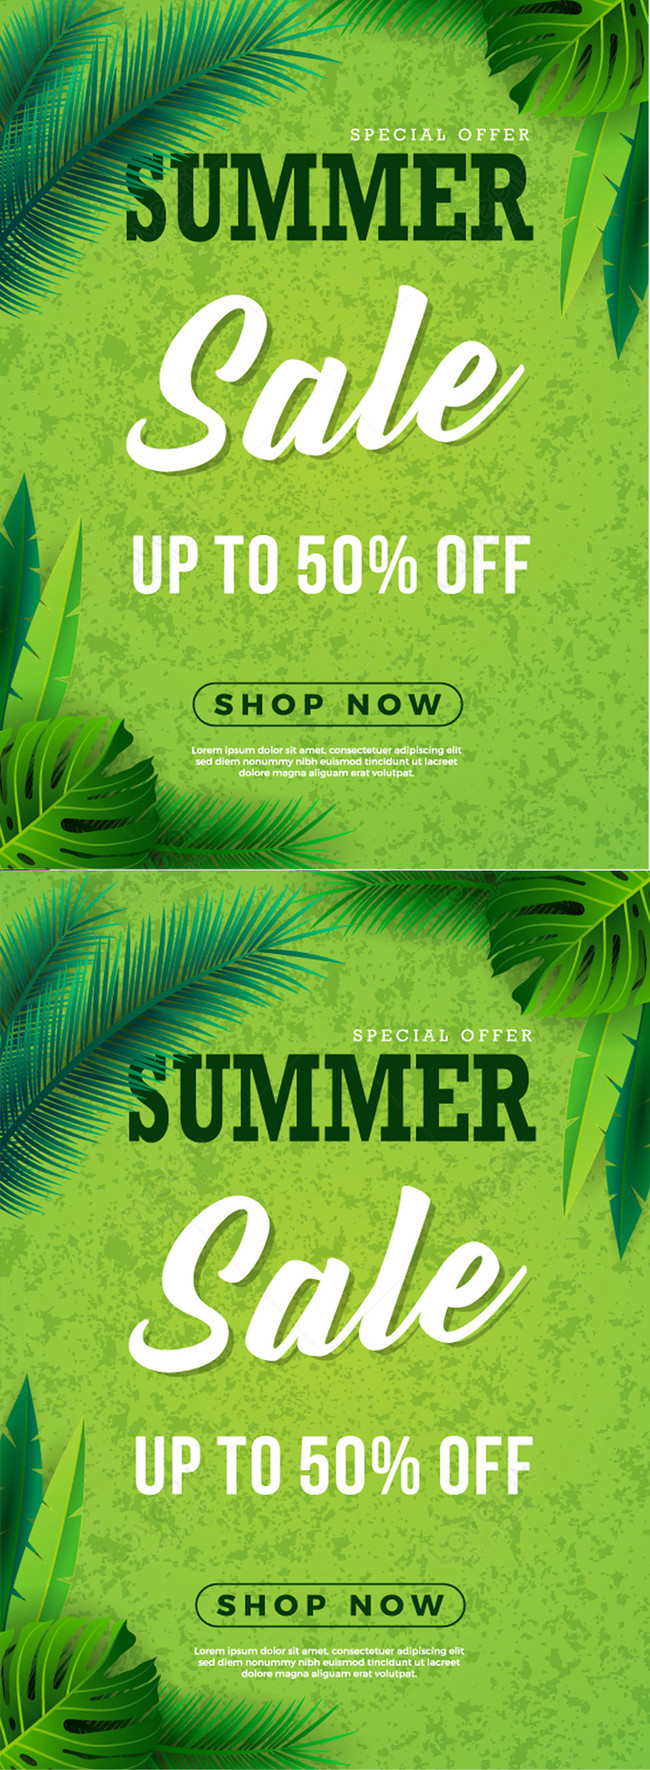 Summer sale flyer with green tropical plants template For Plant Sale Flyer Template